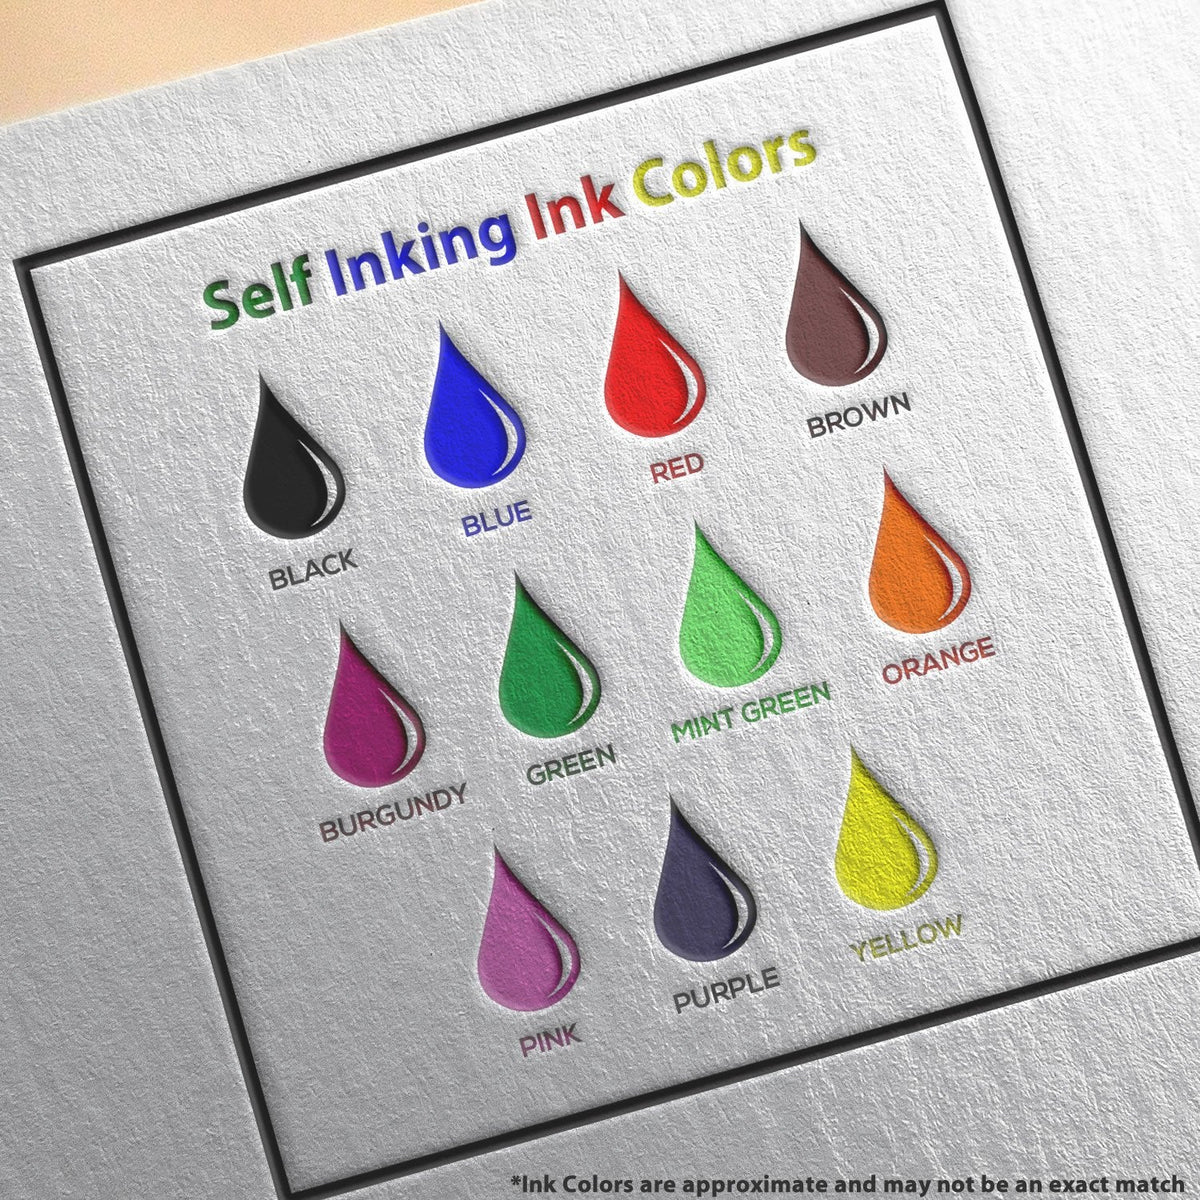 Self-Inking Revised with Box Stamp Ink Color Options